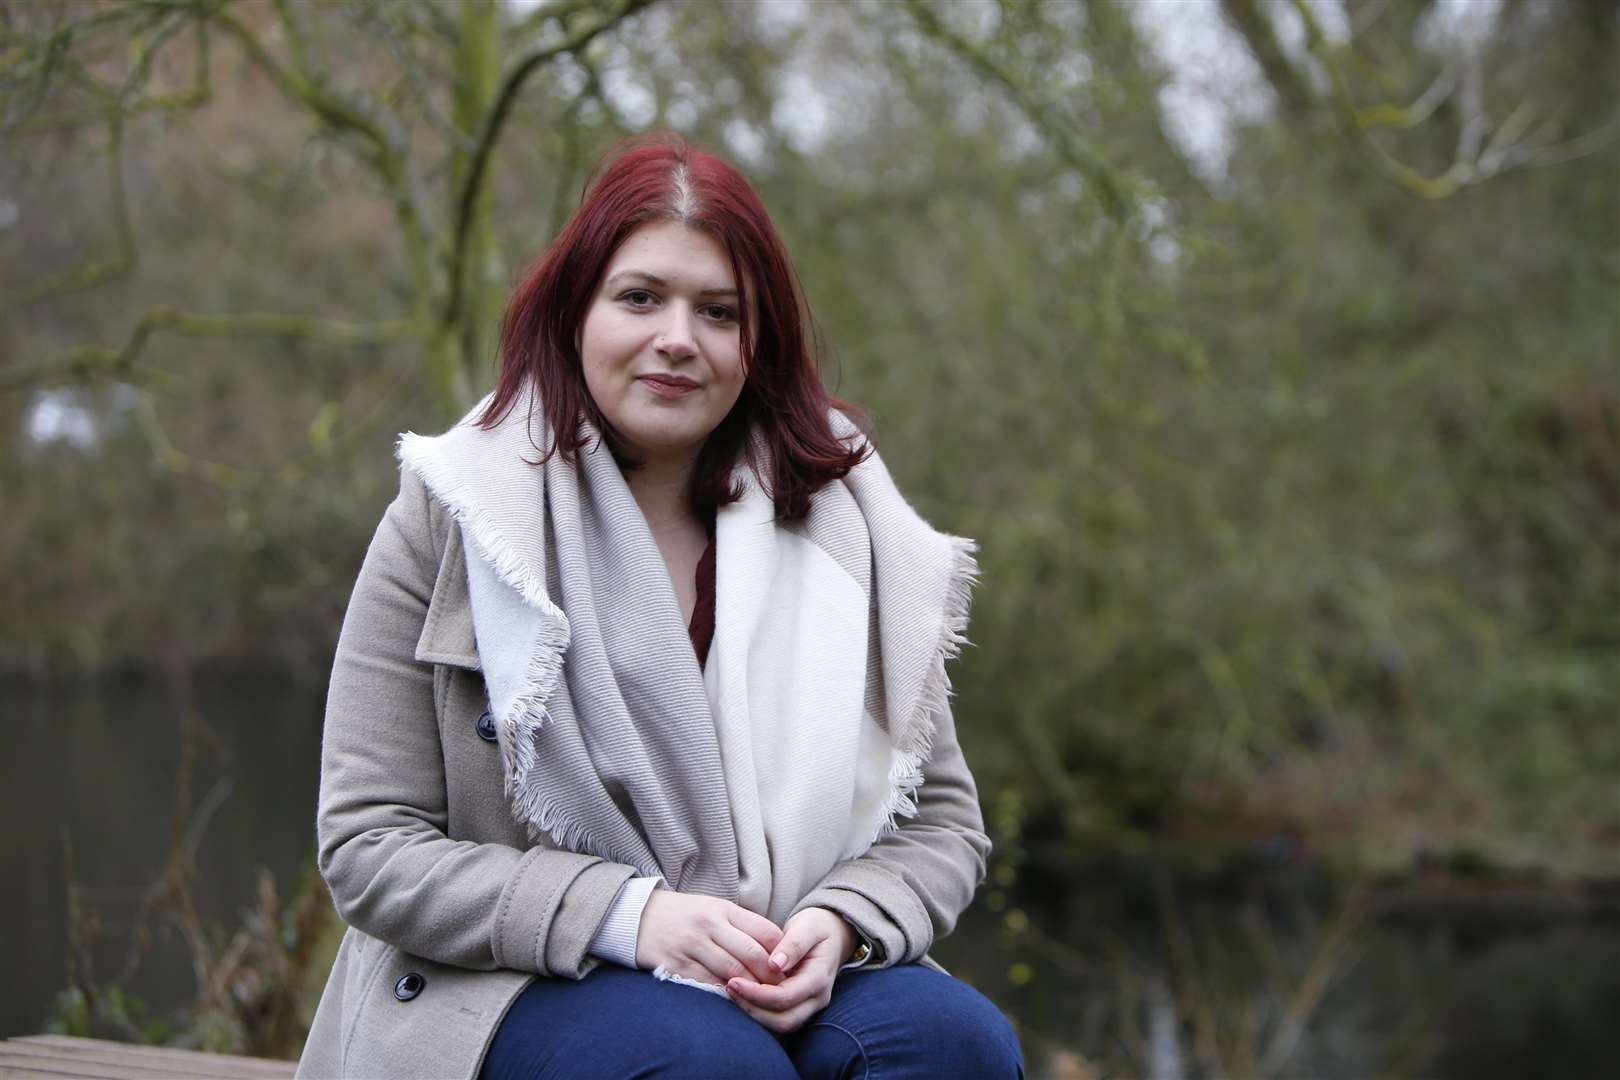 Tamsyn Phillips is a young woman with bipolar and borderline personality disorder who wants to break the stigma around mental health. Picture: Andy Jones